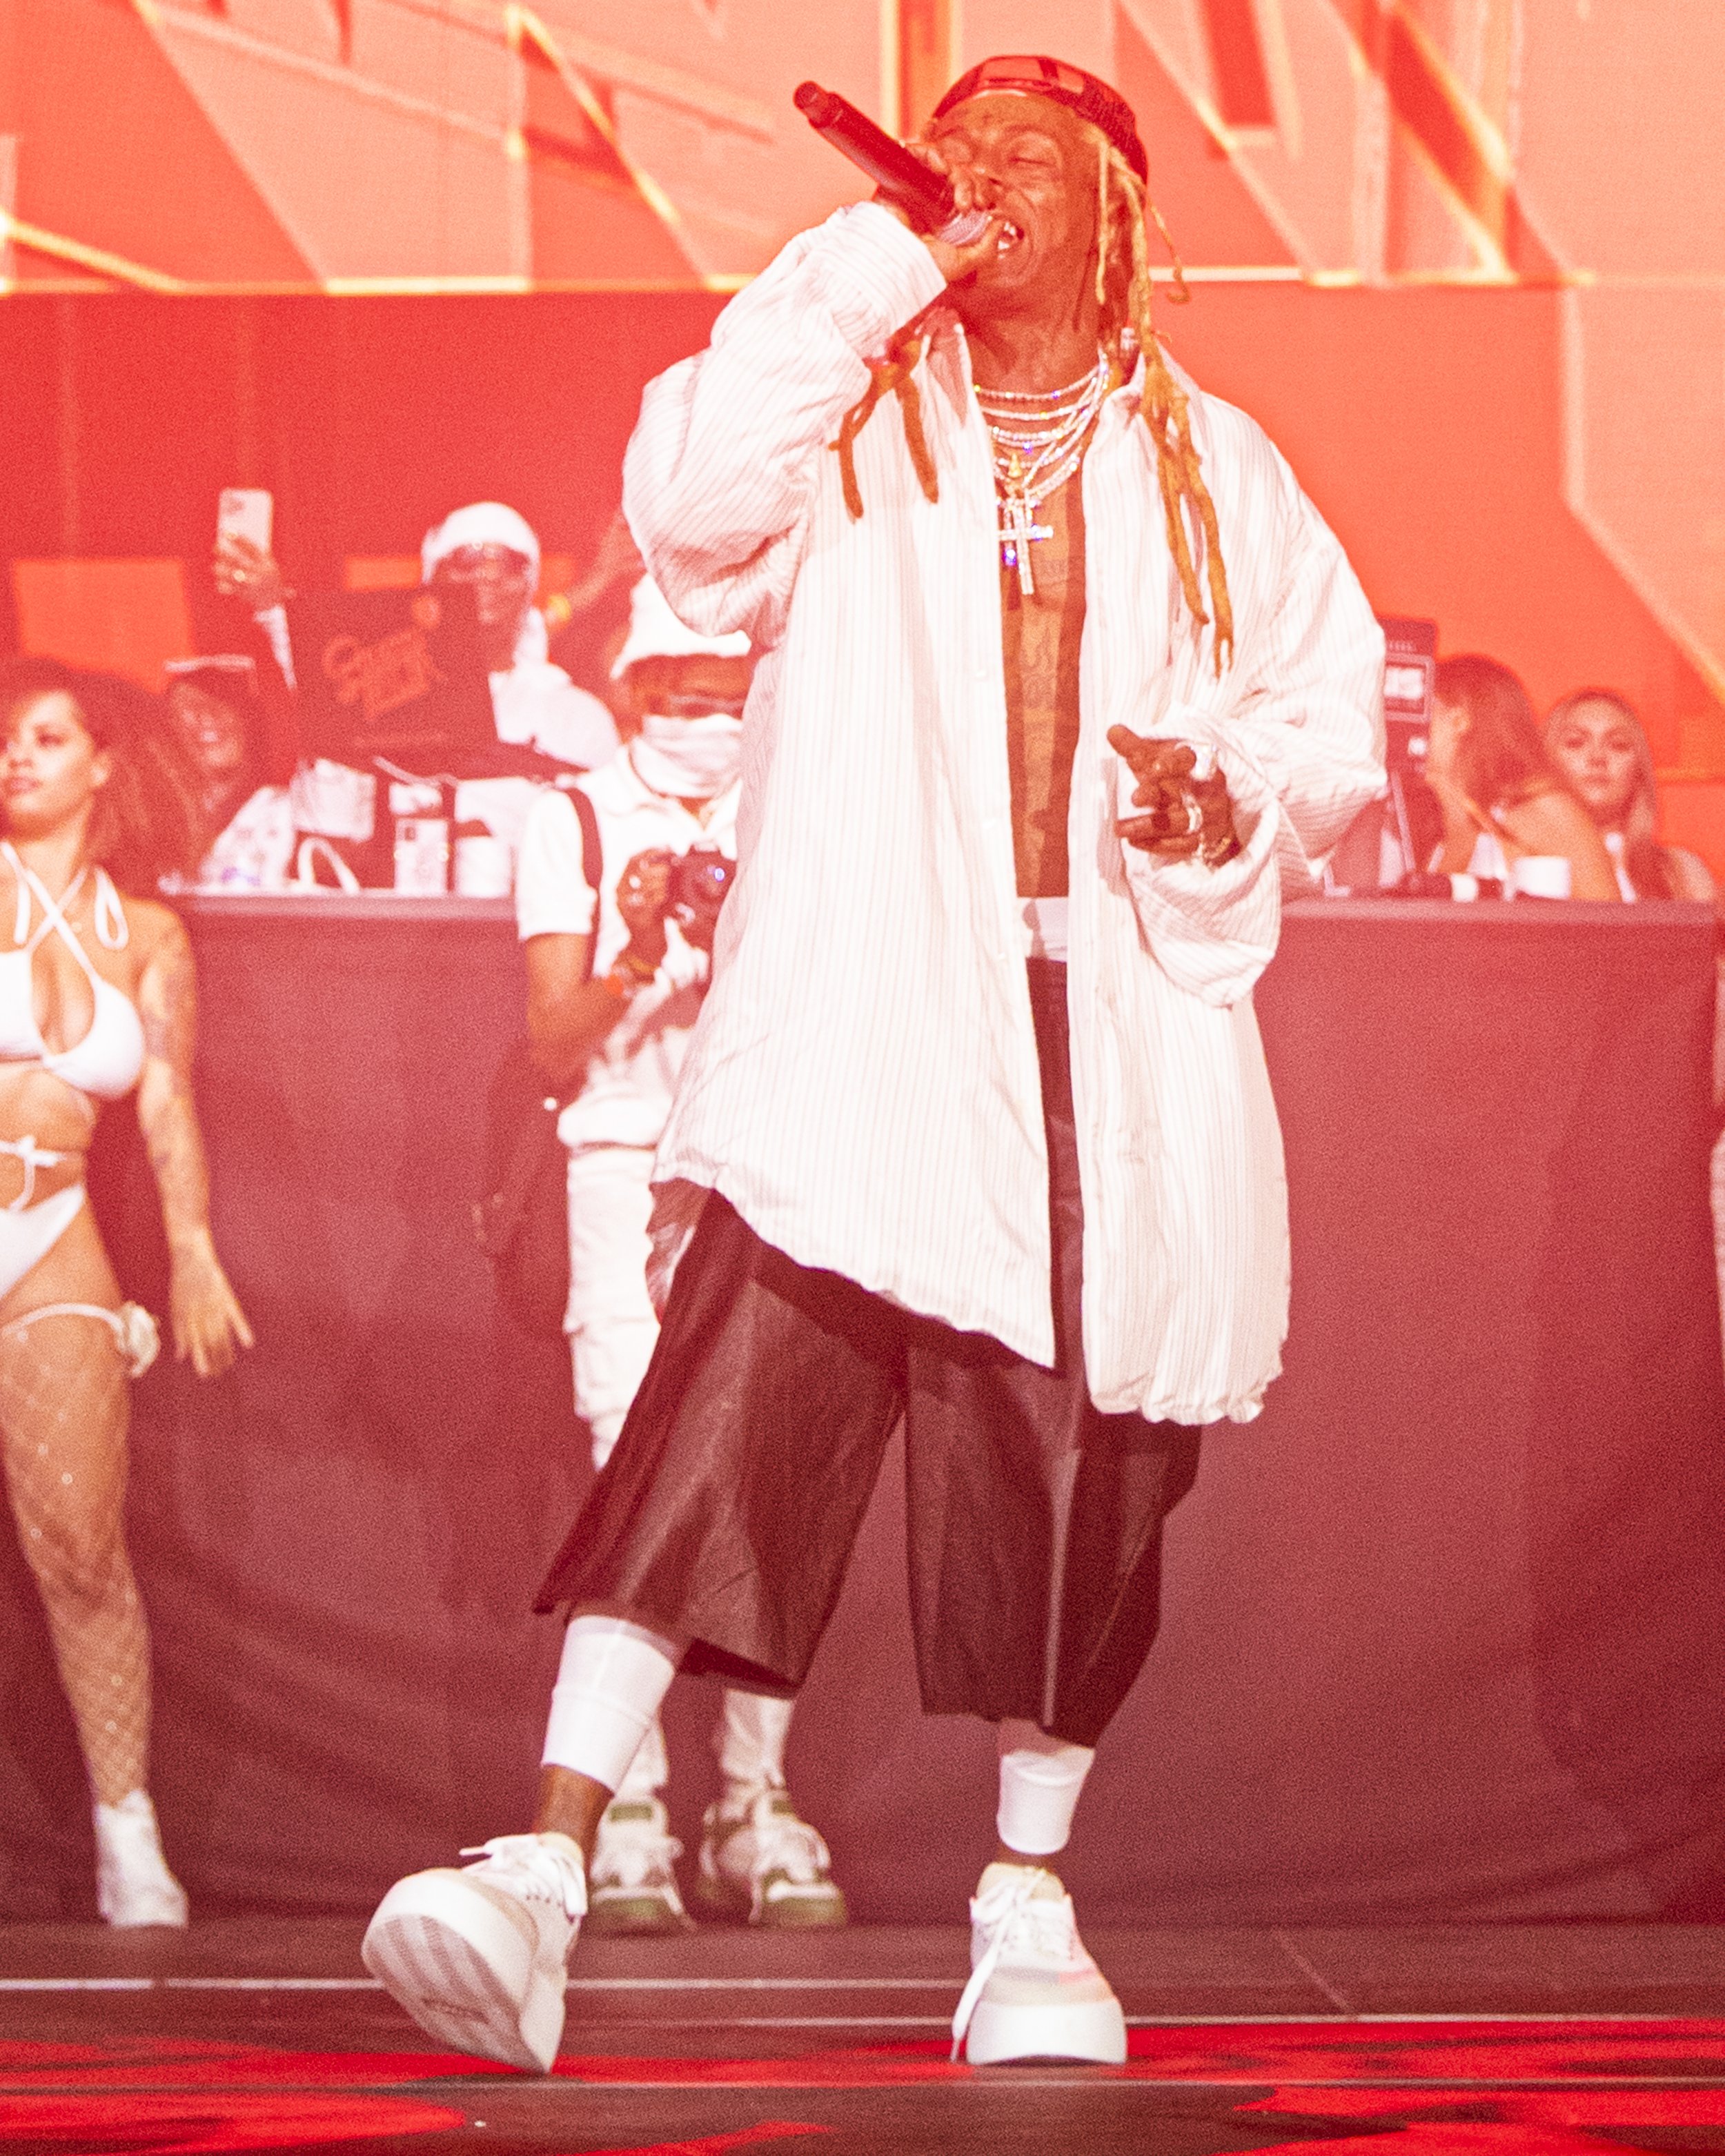 Lil Wayne and Von Miller -  The 18th Annual All White Attire Party -  PHOTO BY Mowgli Miles of Interracial Frineds-80.JPG